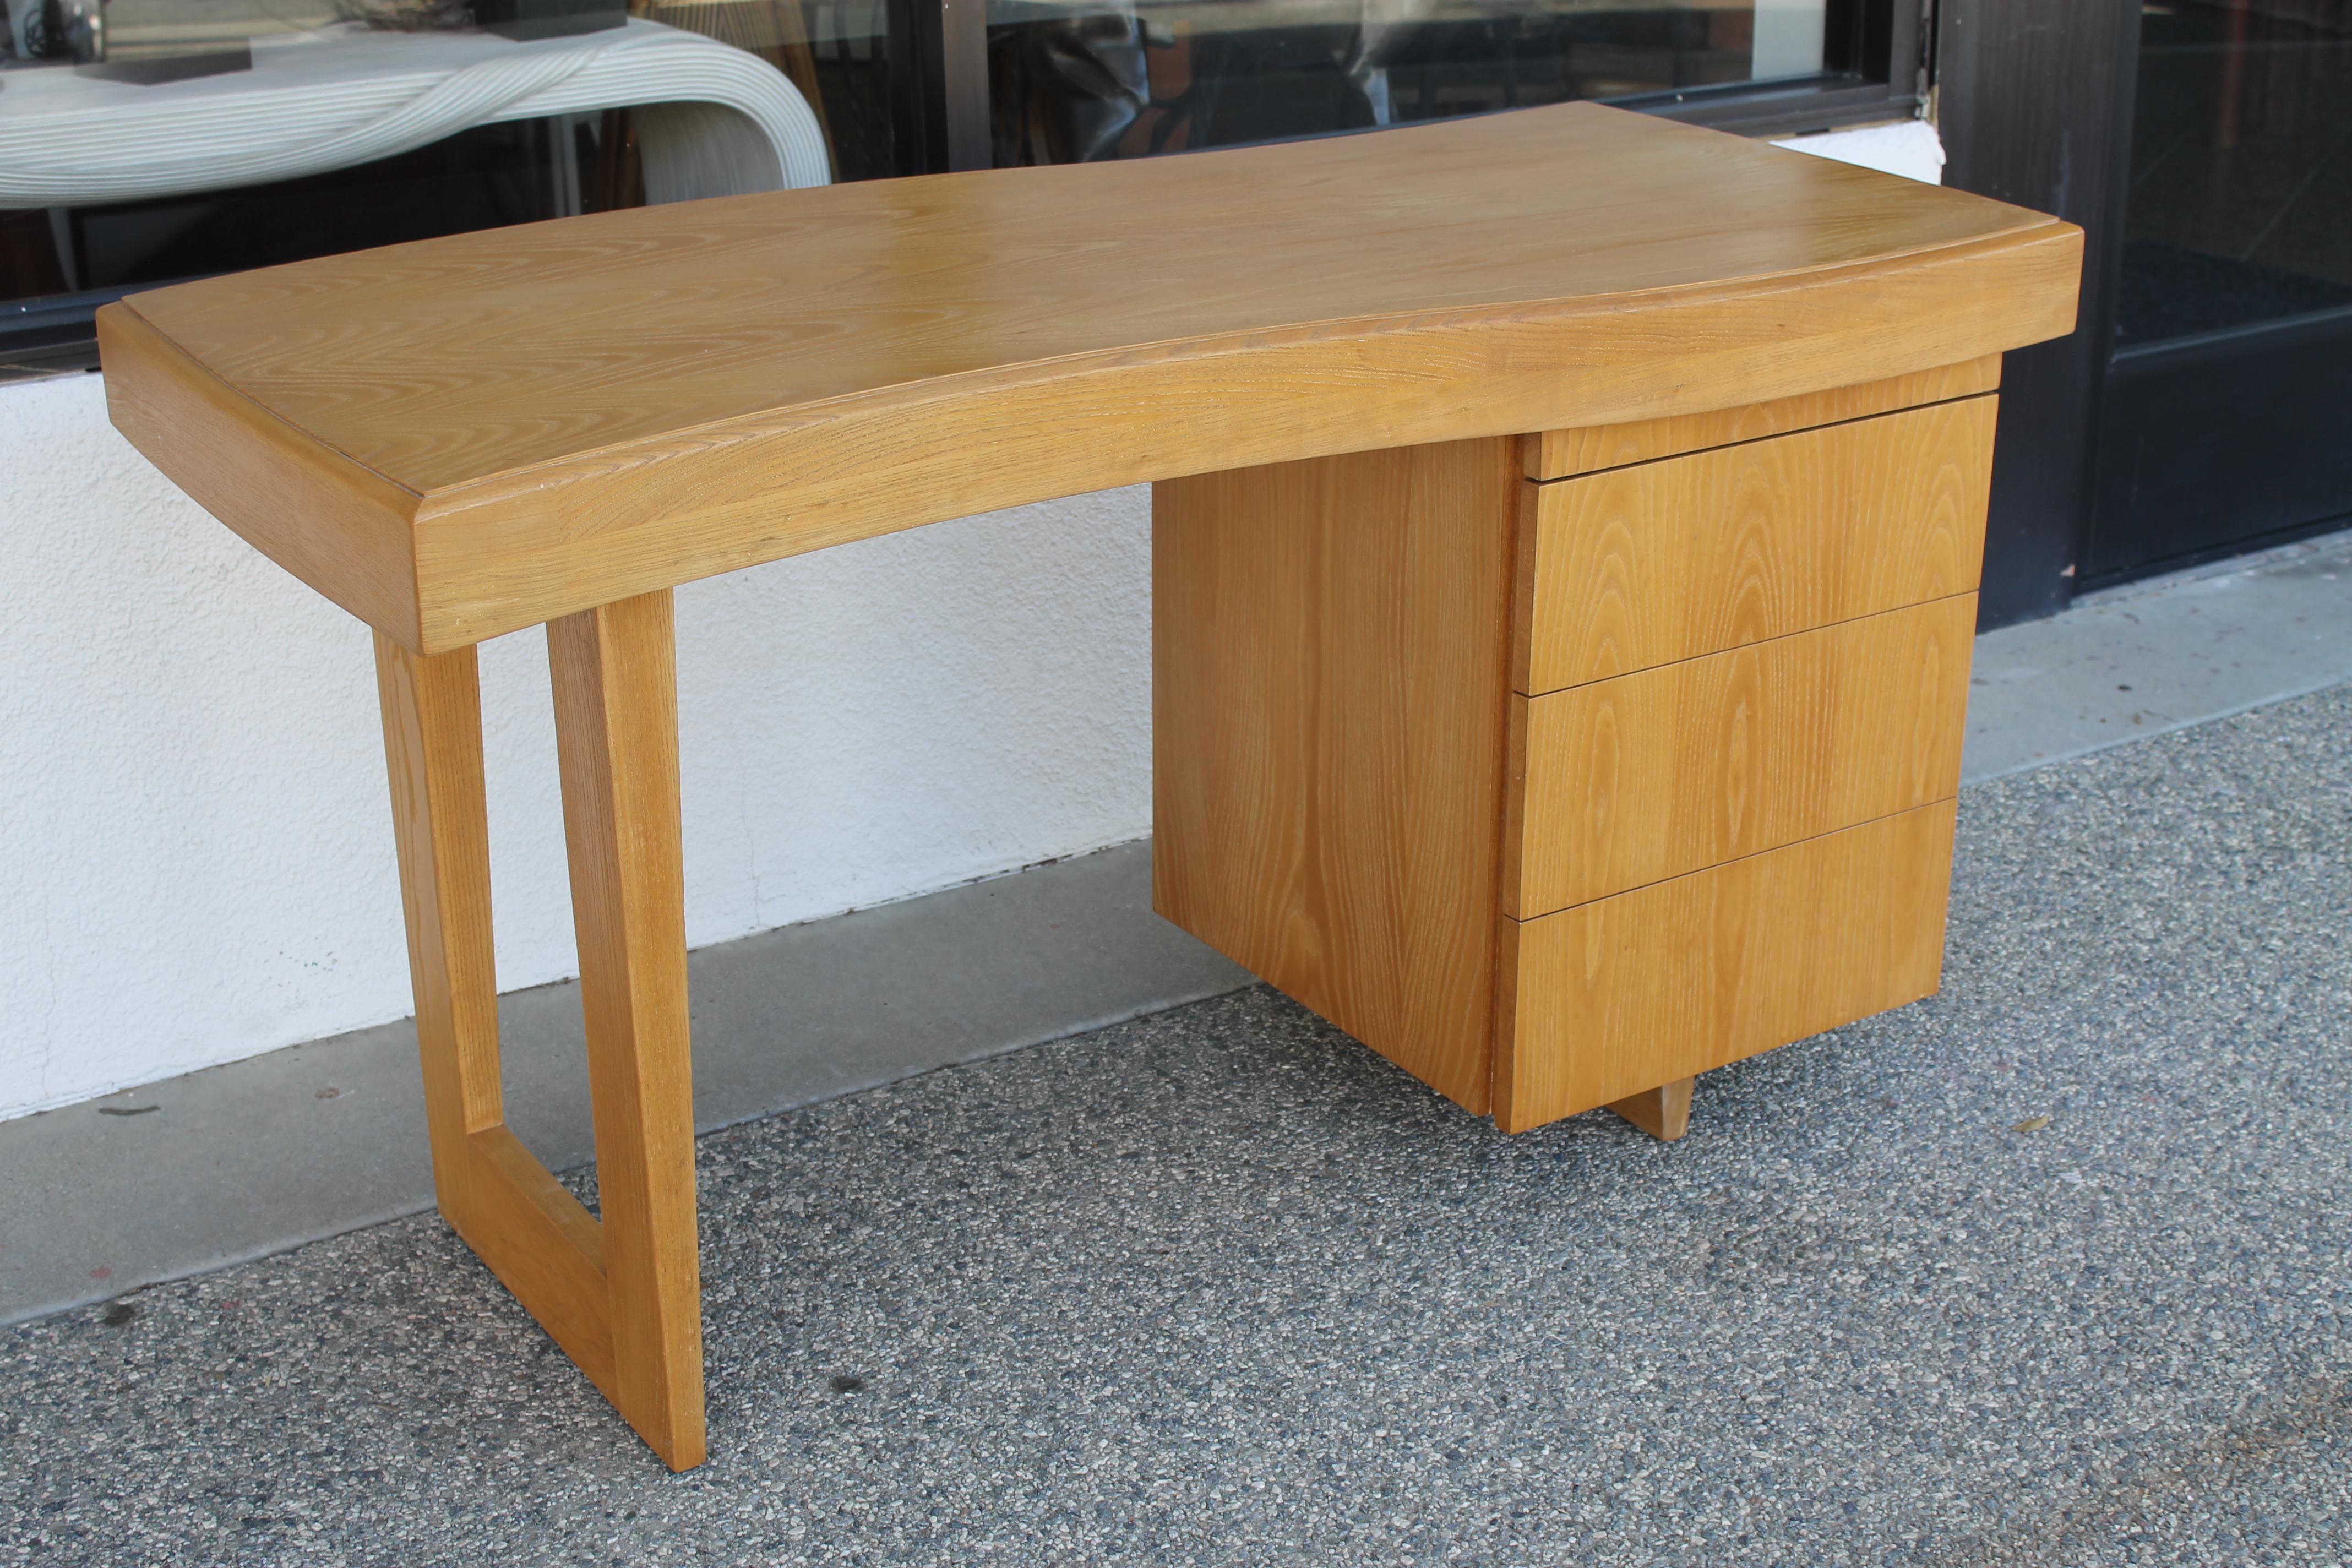 Desk by Paul Laszlo for Brown Saltman, California. Wood is silver elm. Desk measures 53.5” wide, 26” deep and 29.5” high. Desk has been professionally refinished.  Table knee clearance is 26